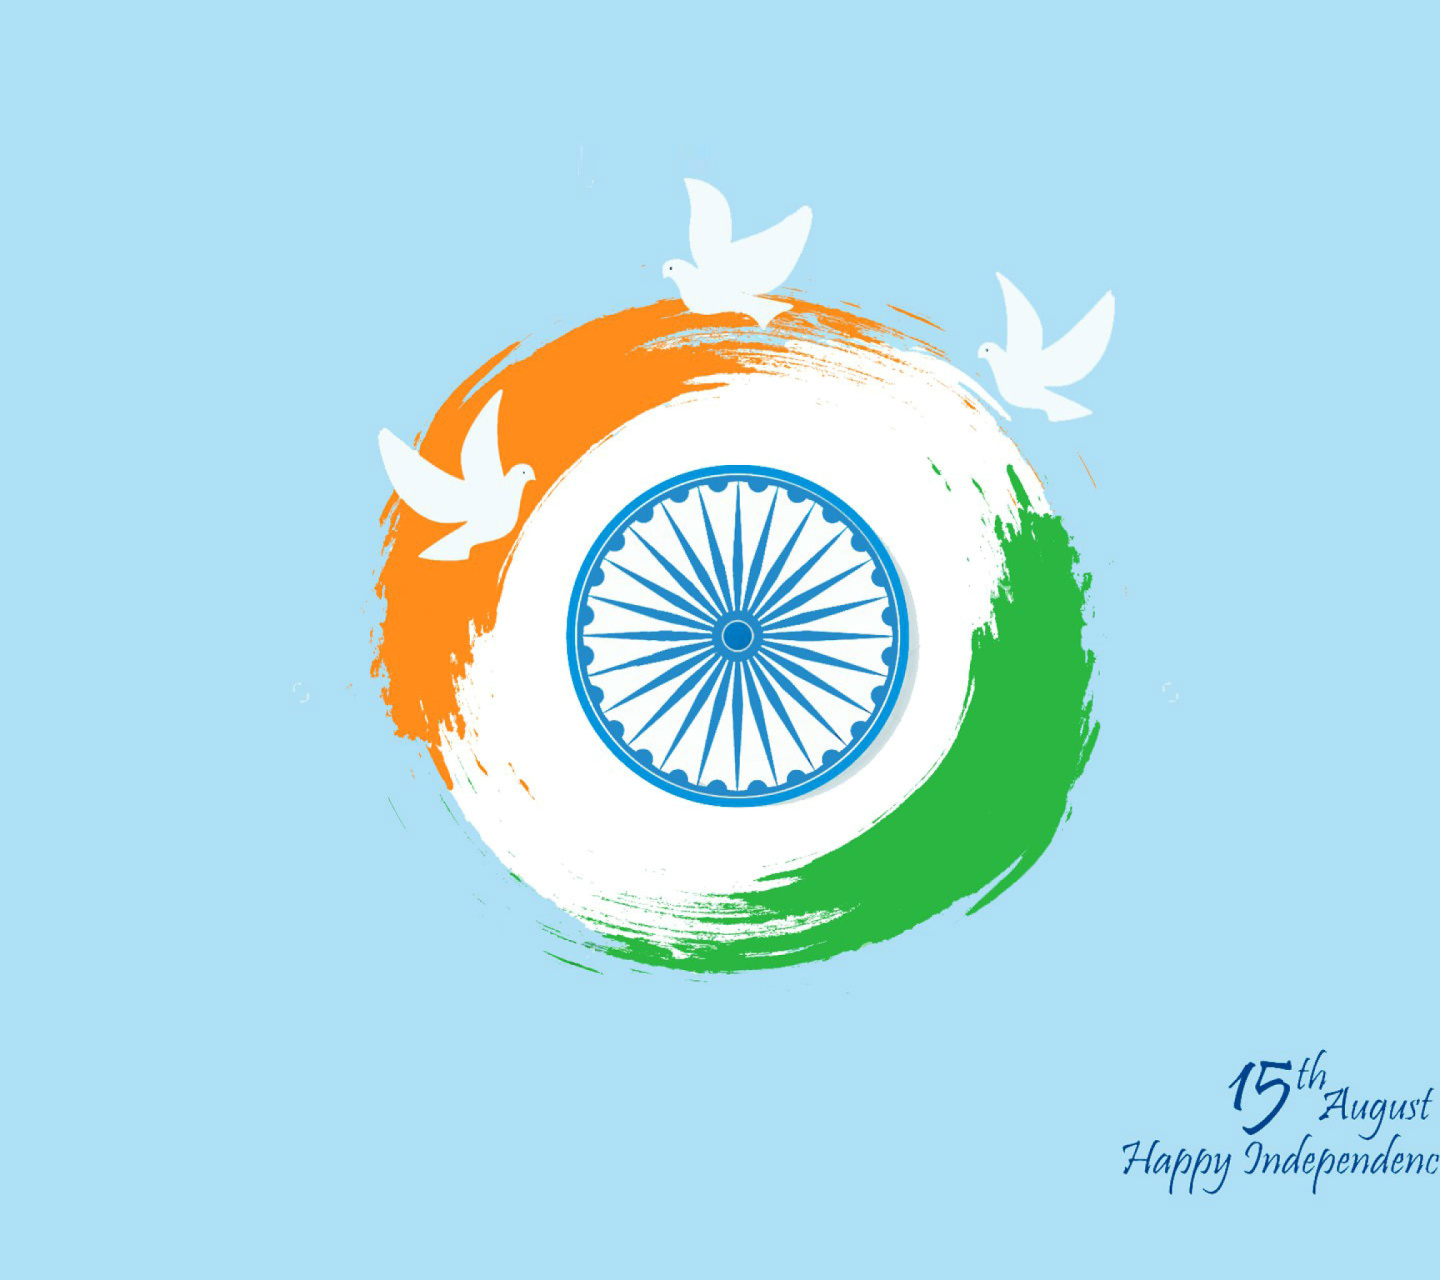 15th August Indian Independence Day screenshot #1 1440x1280